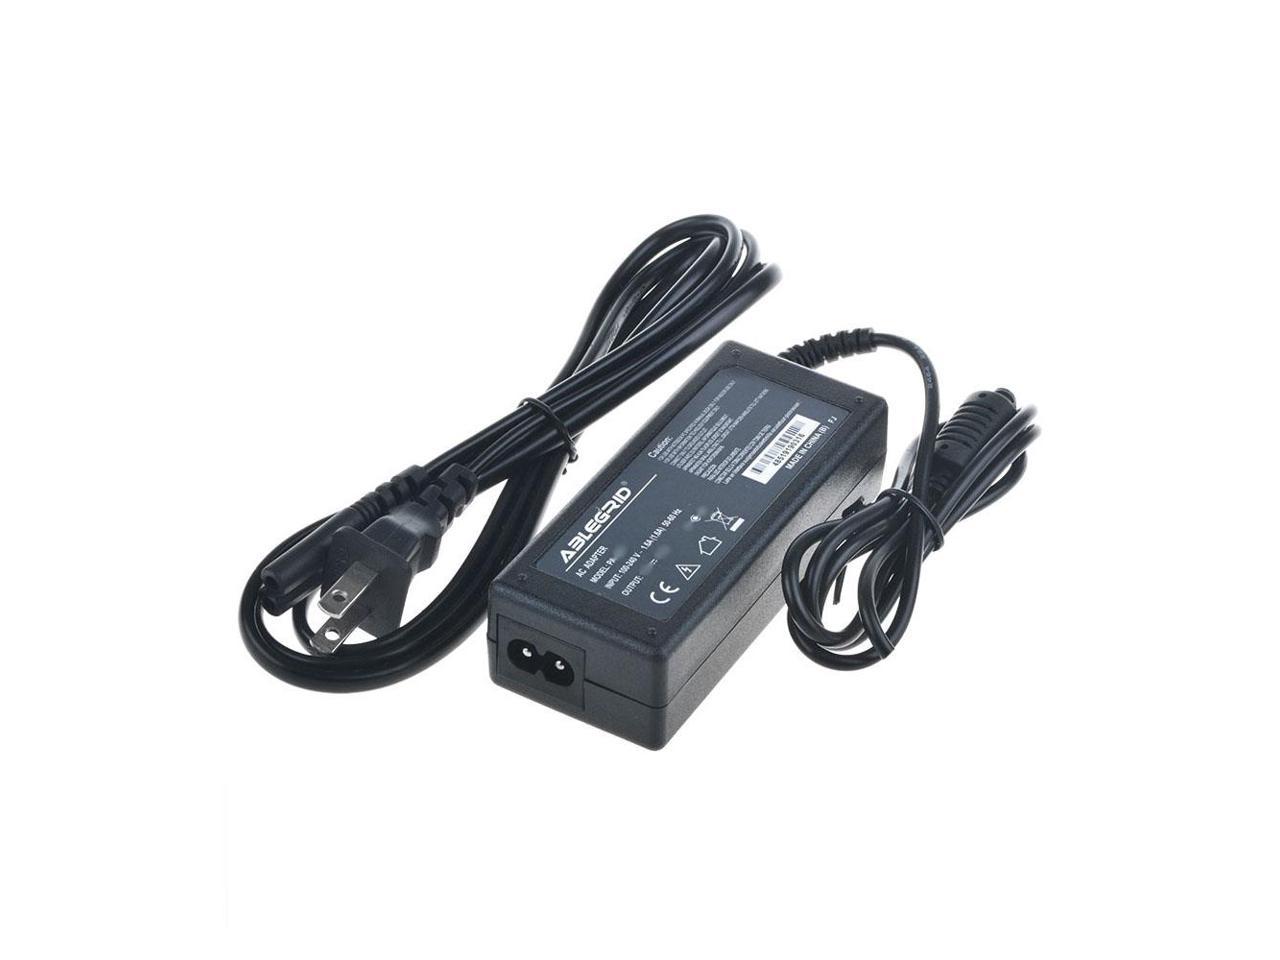 NEW AC Adapter For Promethean ActivBoard 300 Pro DC Power Supply Battery Charger 